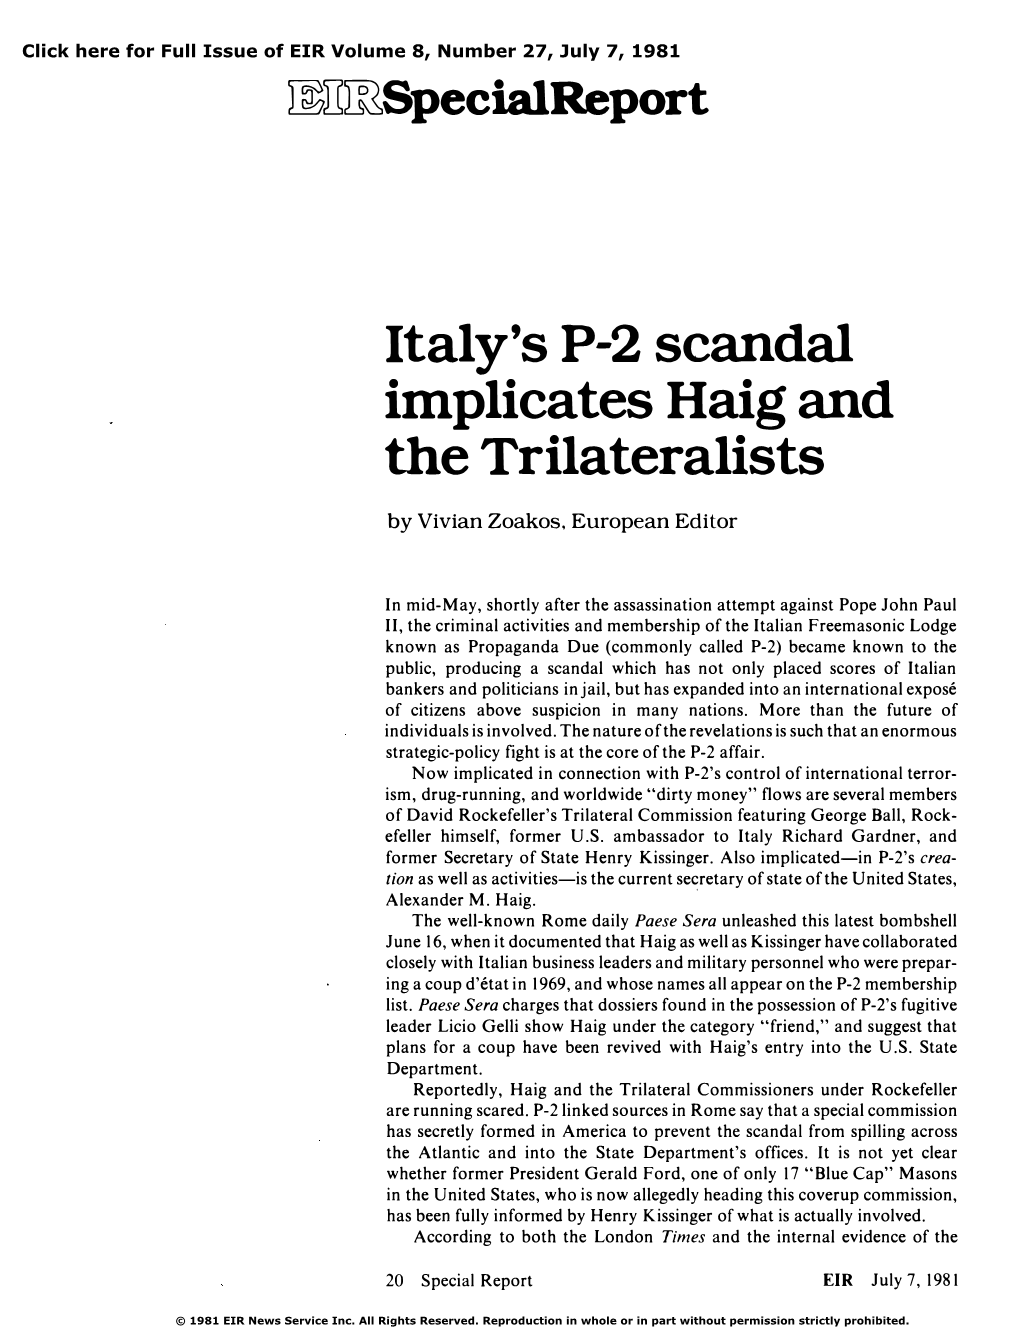 Italy's P-2 Scandal Implicates Haig and the Trilateralists